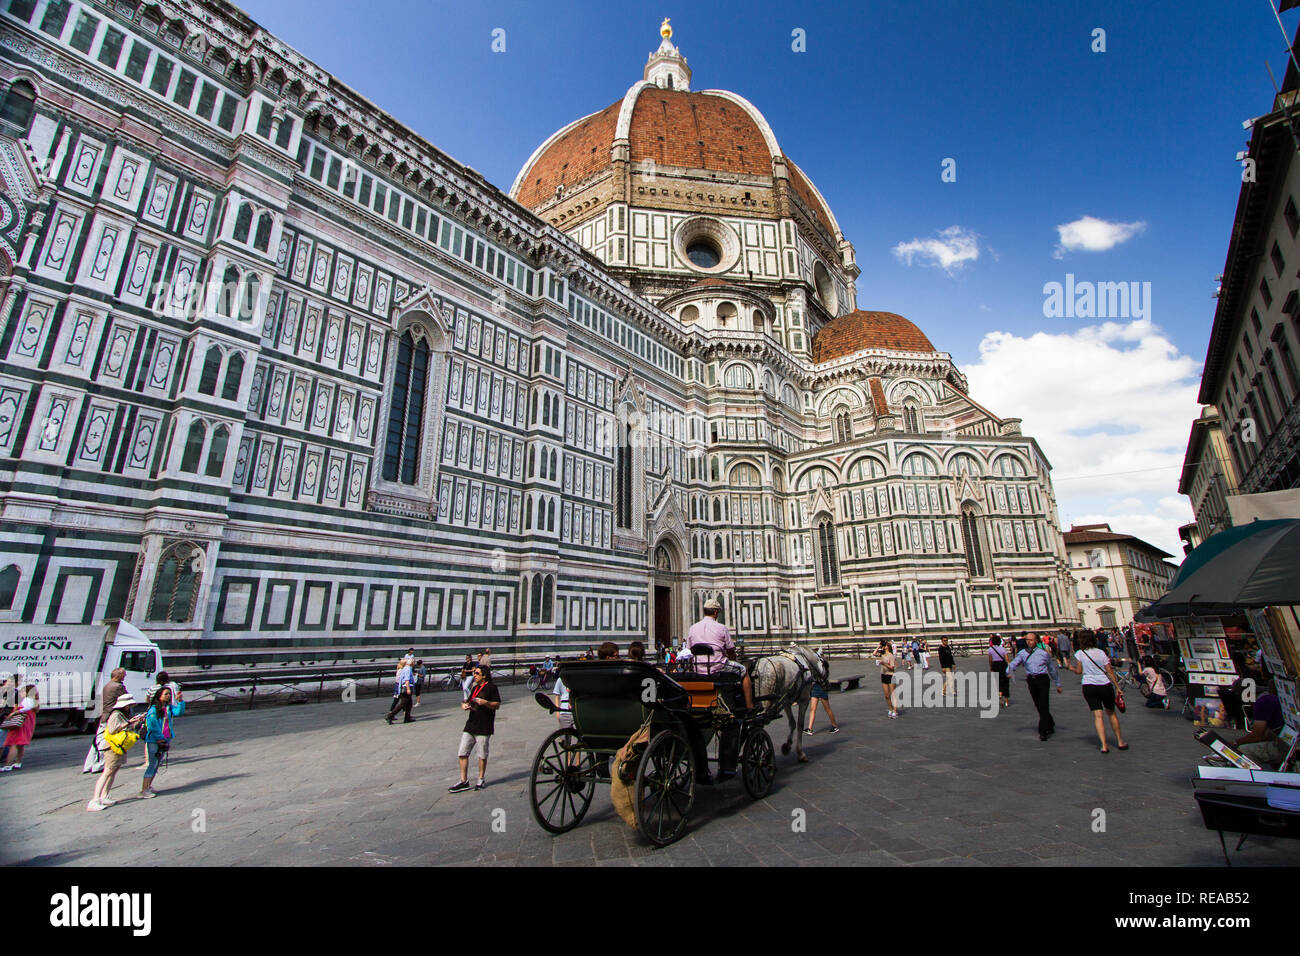 Massive - A horse-drawn carriage passes through a plaza next to the majestic Florence Cathedral. Florence, Italy Stock Photo